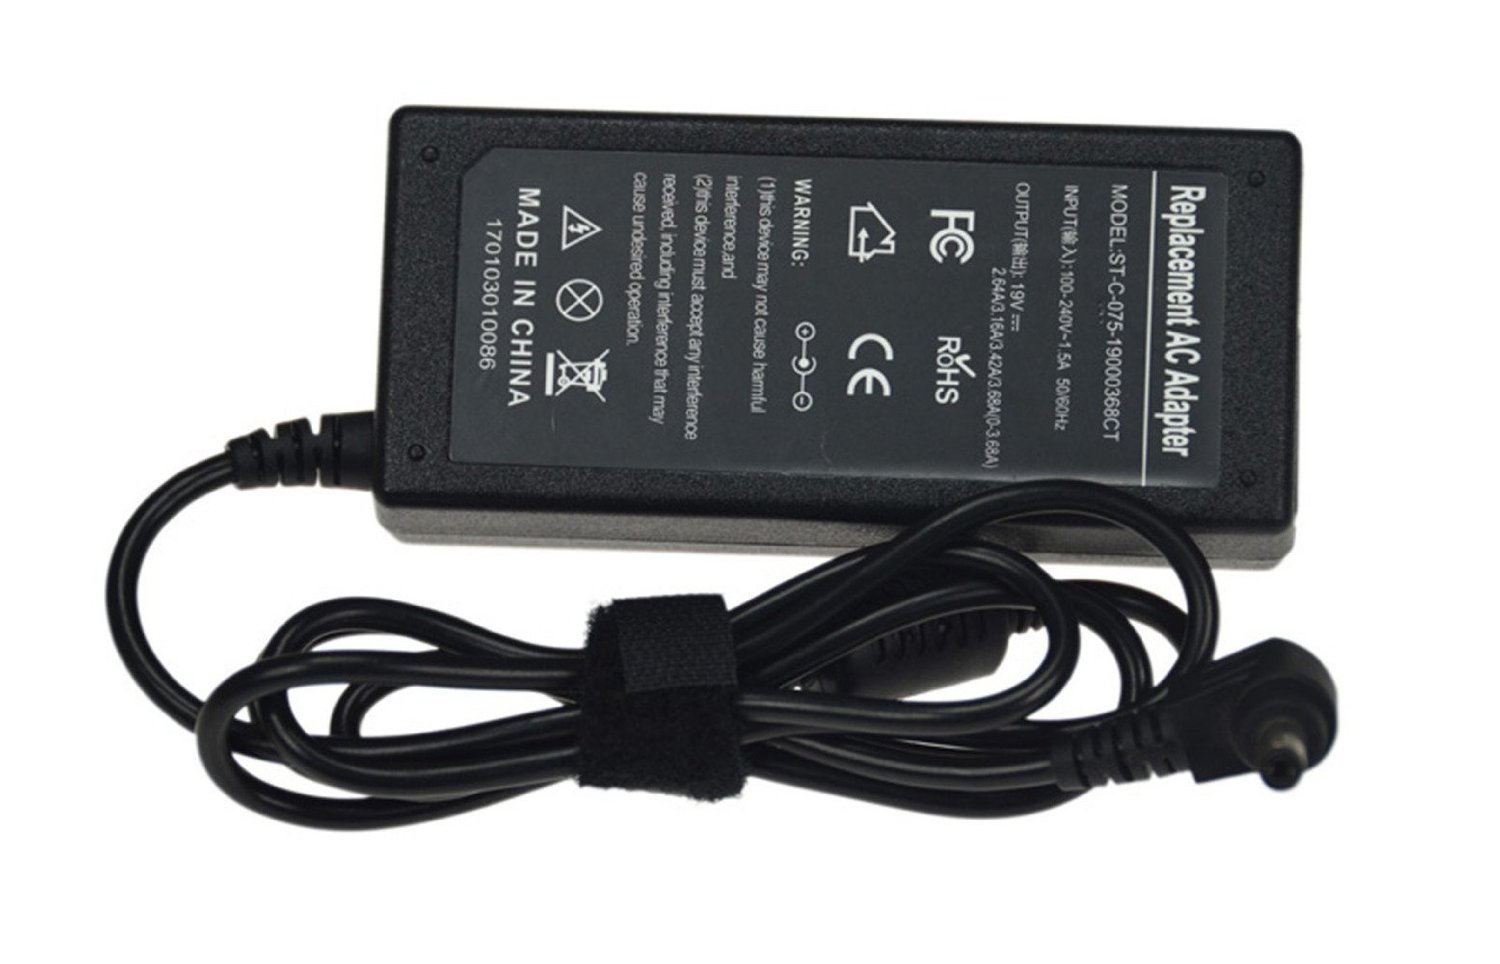 AC Power Adapter for Toshiba Satellite L745-S4310 L745-S4355 L745-SP4141CL L745-SP4146CL L745-SP4147CL L745-SP4149LL L745-SP4171RM L745-SP4175NM L745-SP4176FM L745D-S4214 L745D-S4220BN L745D-S4220GR L745D-S4220RD L745D-S4220WH L745D-S4230